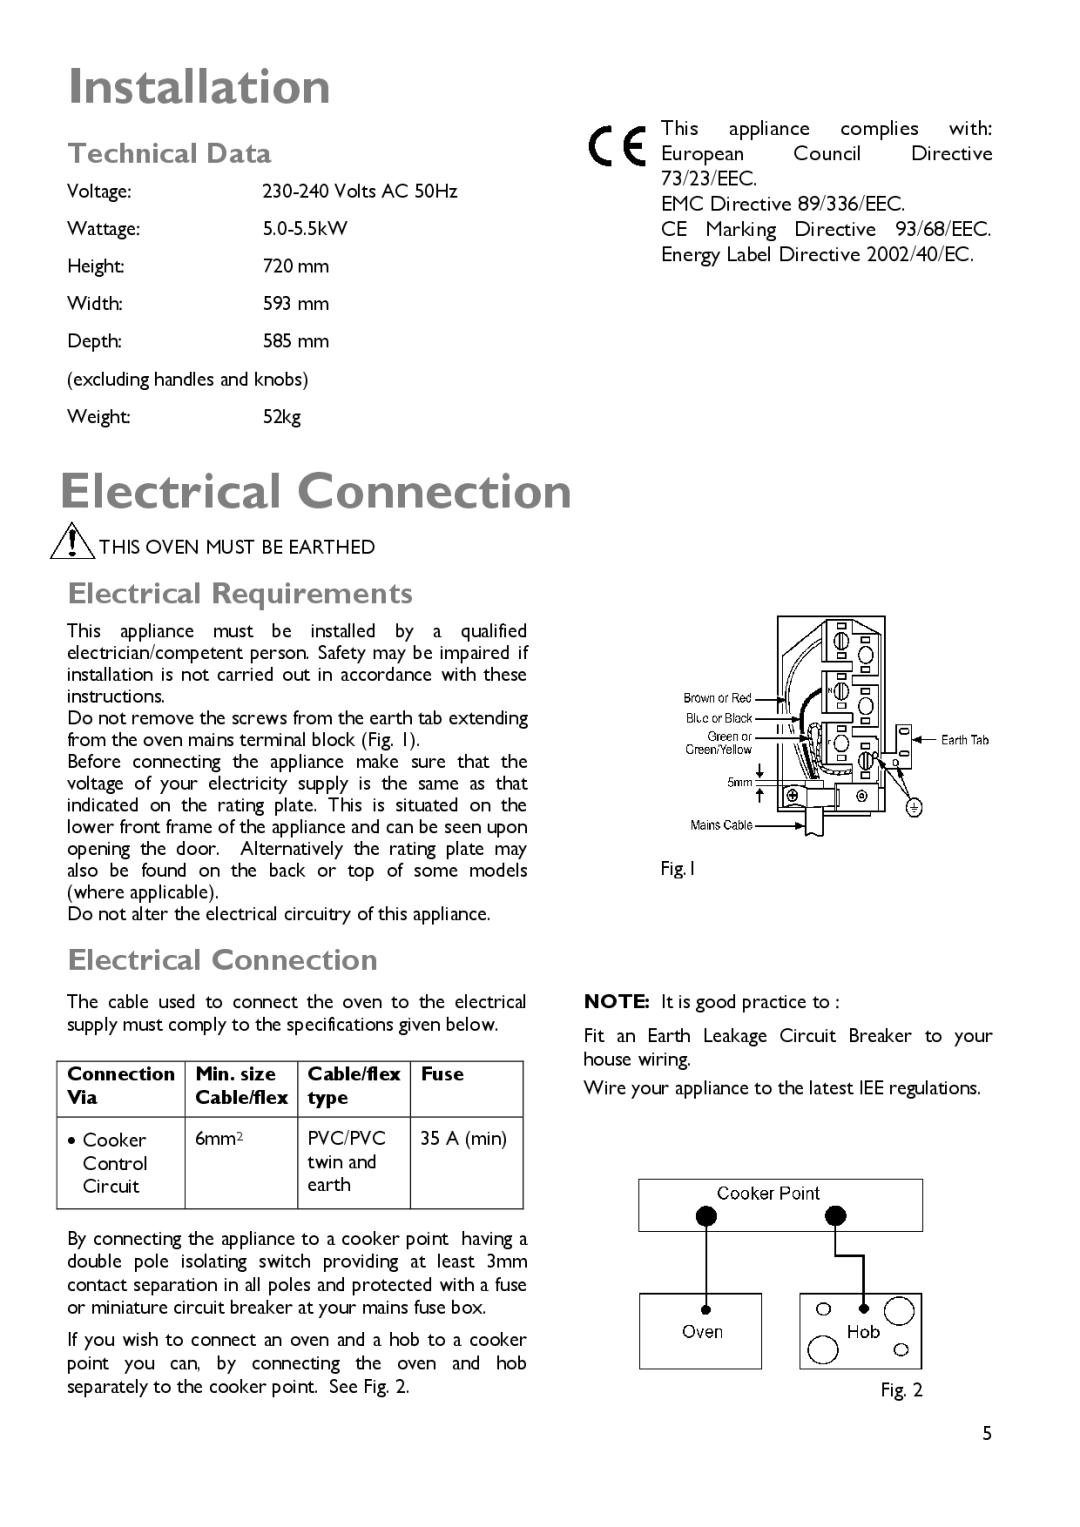 John Lewis JLDUOS705 instruction manual Installation, Electrical Connection, Electrical Requirements, Technical Data 